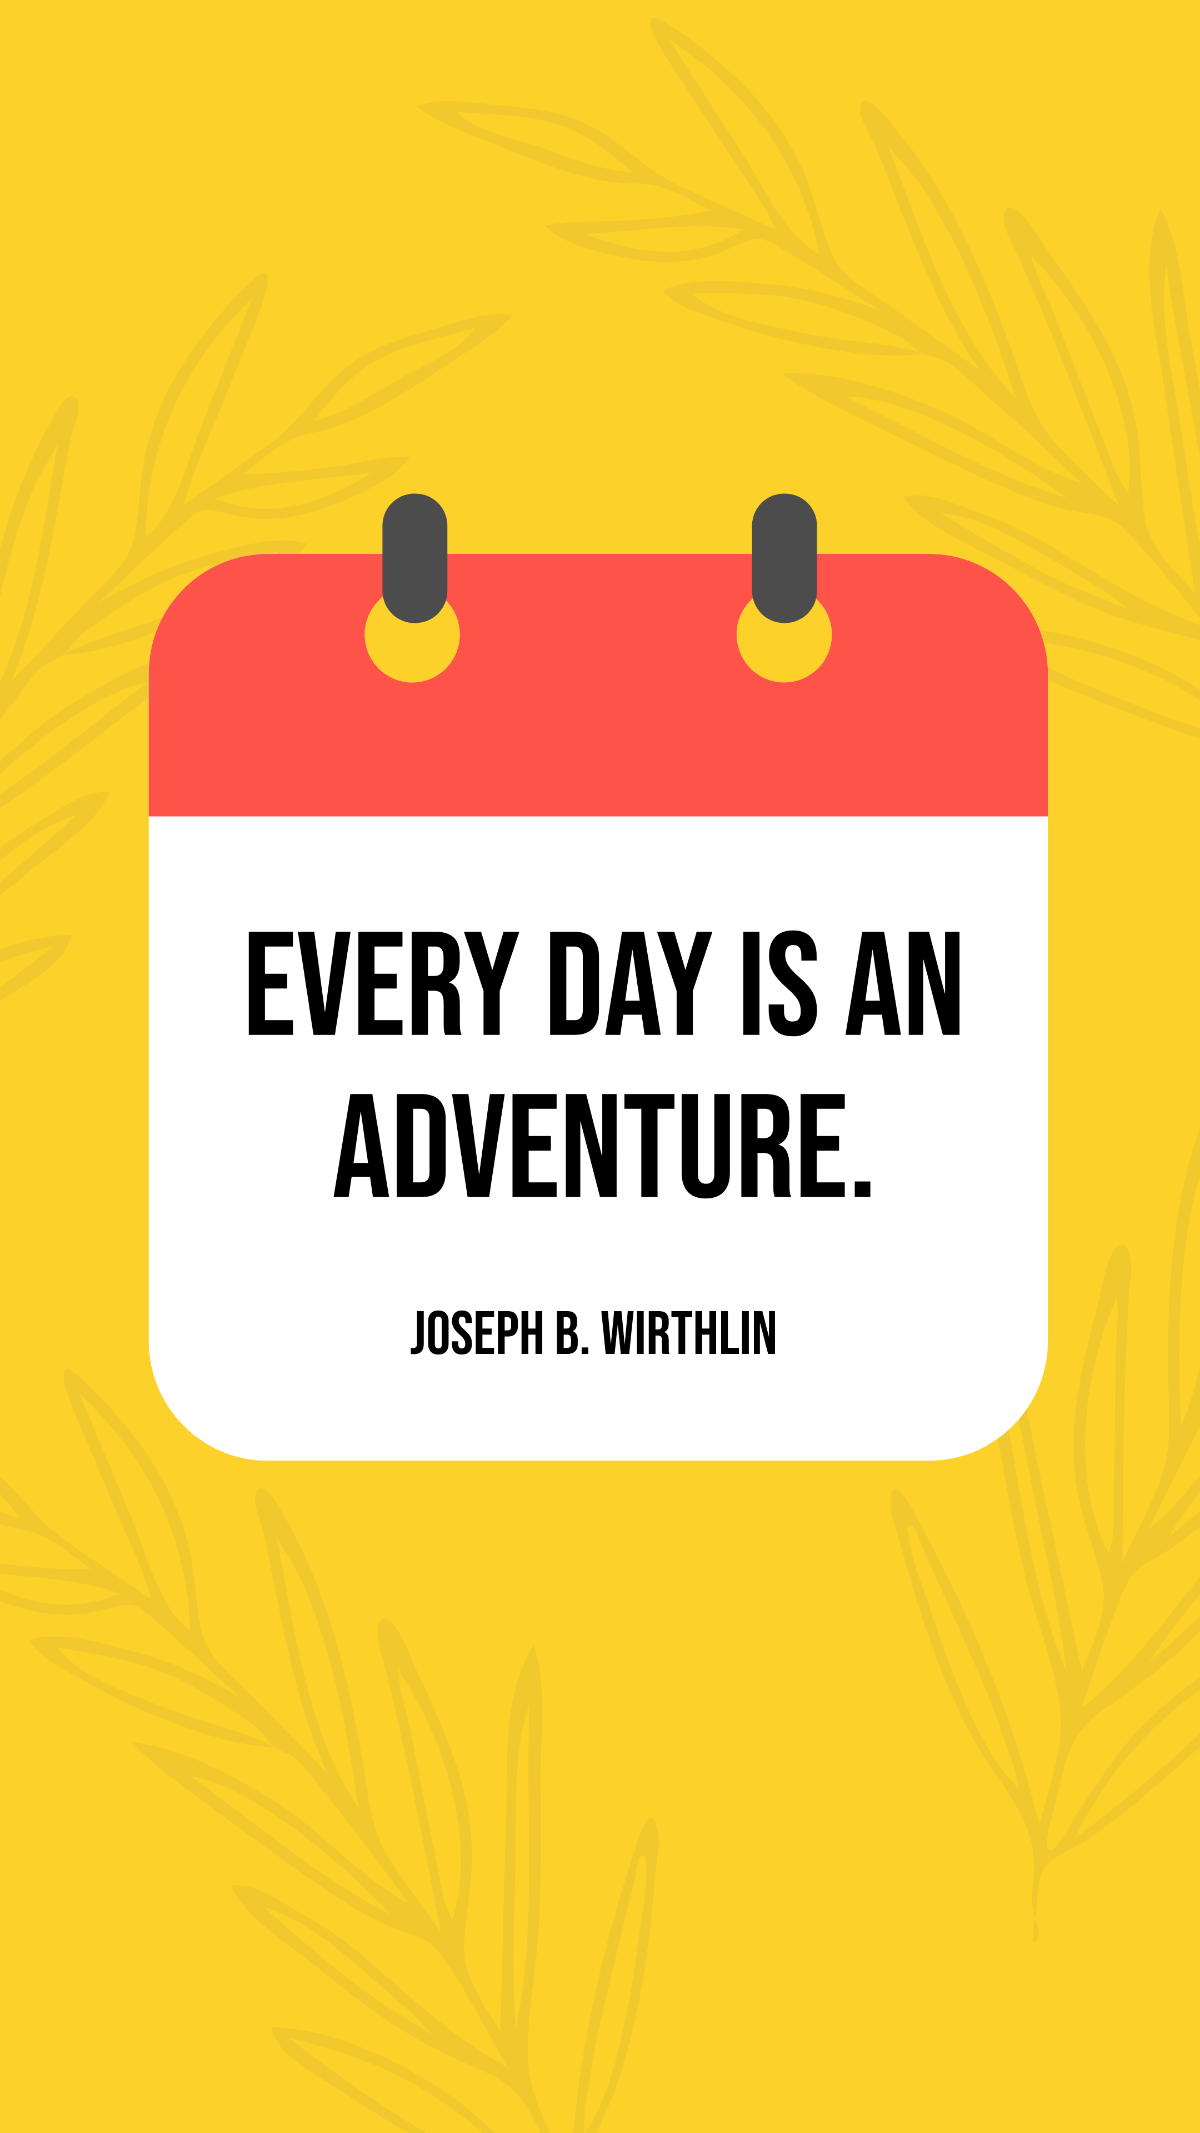 Free Joseph B. Wirthlin - Every day is an adventure. Template